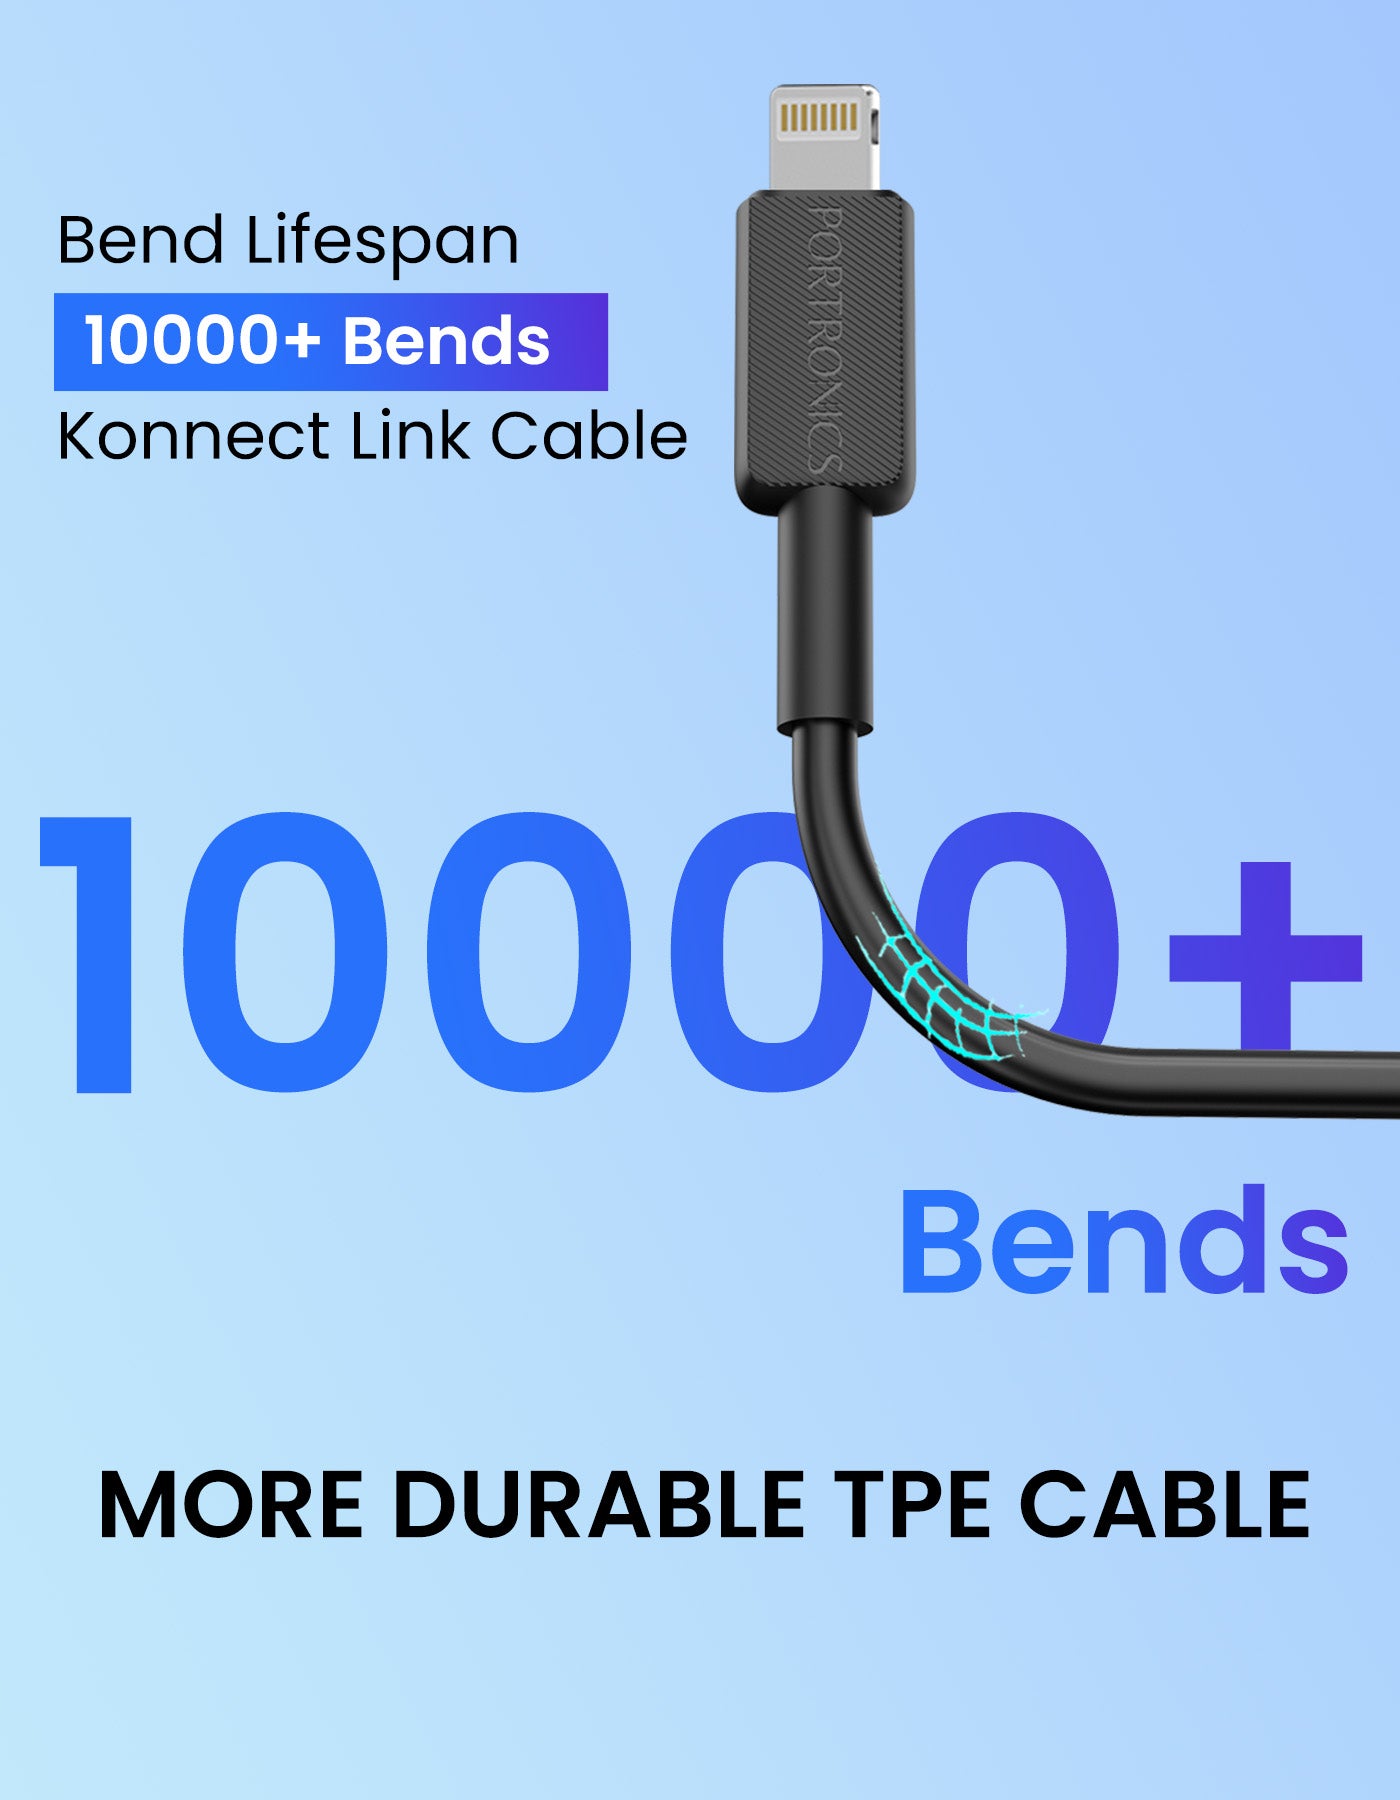 Konnect Link CL - Type C to 8 pin fast charging cable